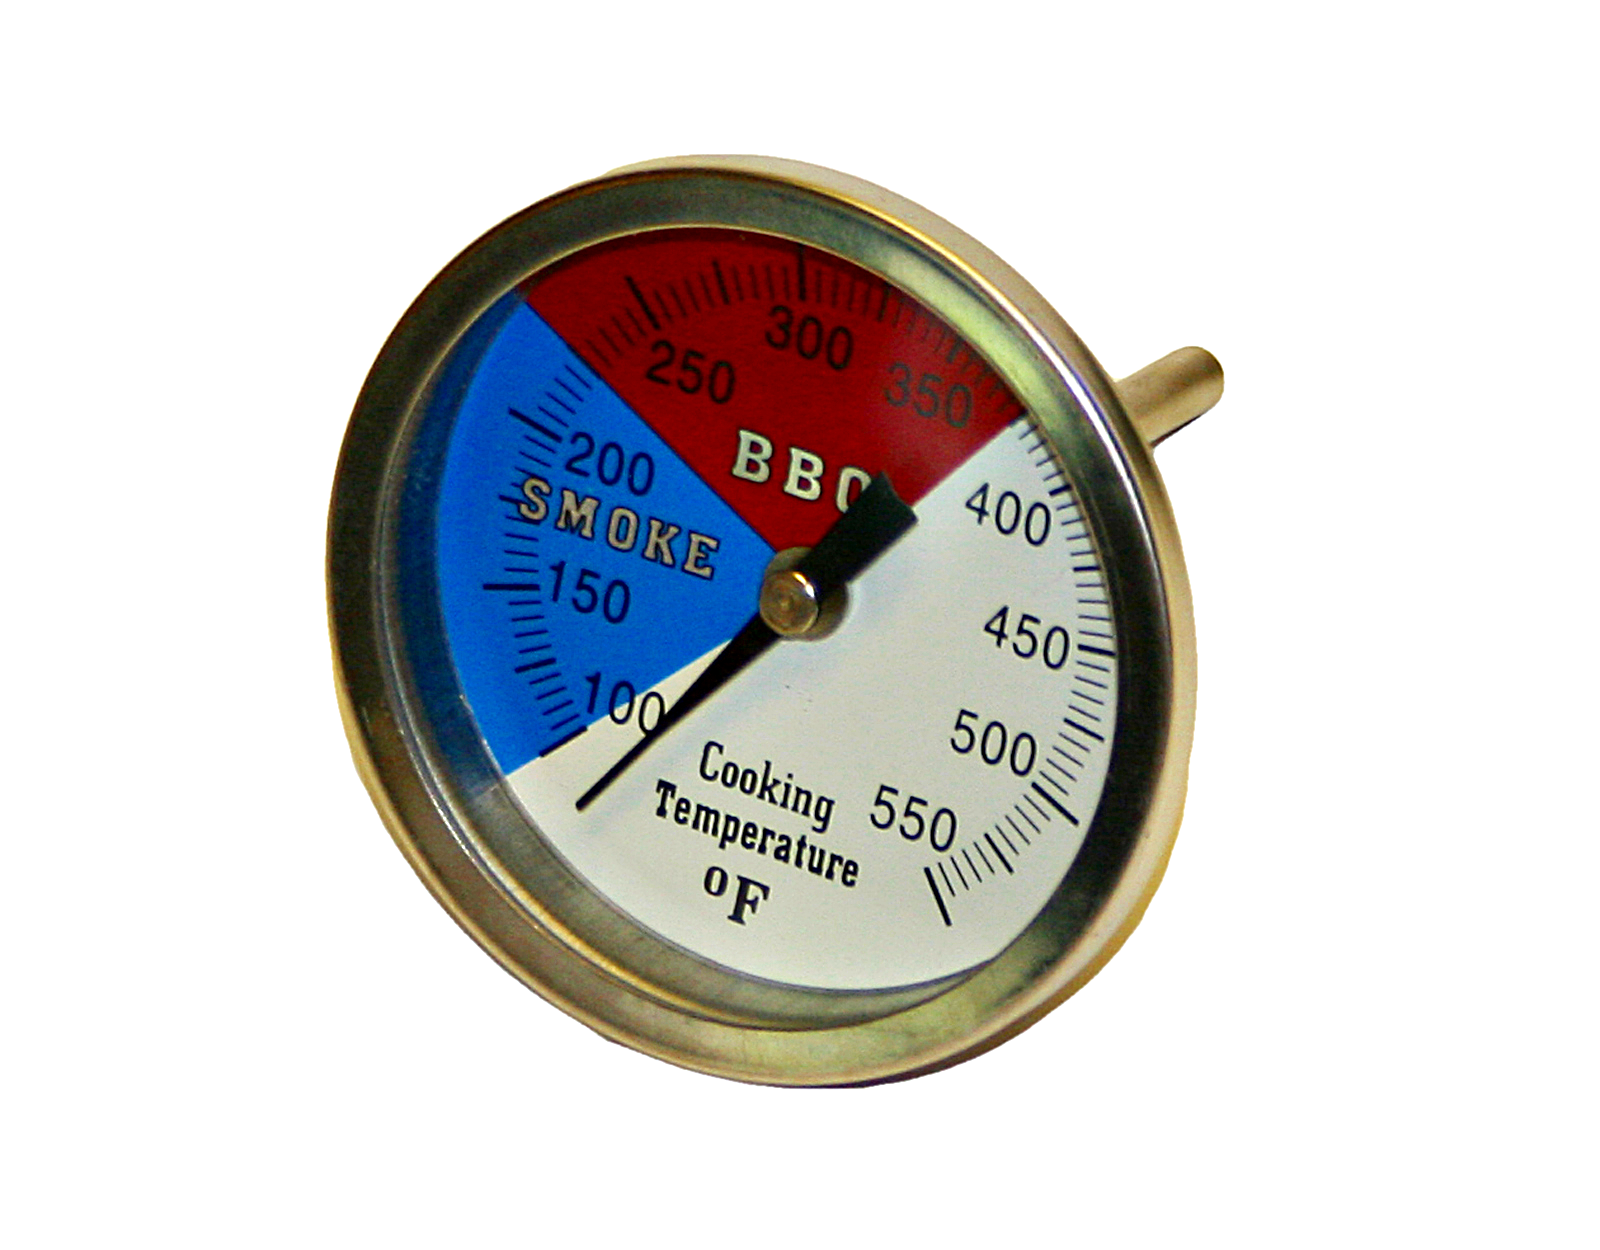 https://pellethead.com/wp-content/uploads/2019/08/GMG-4004-Thermometer.png